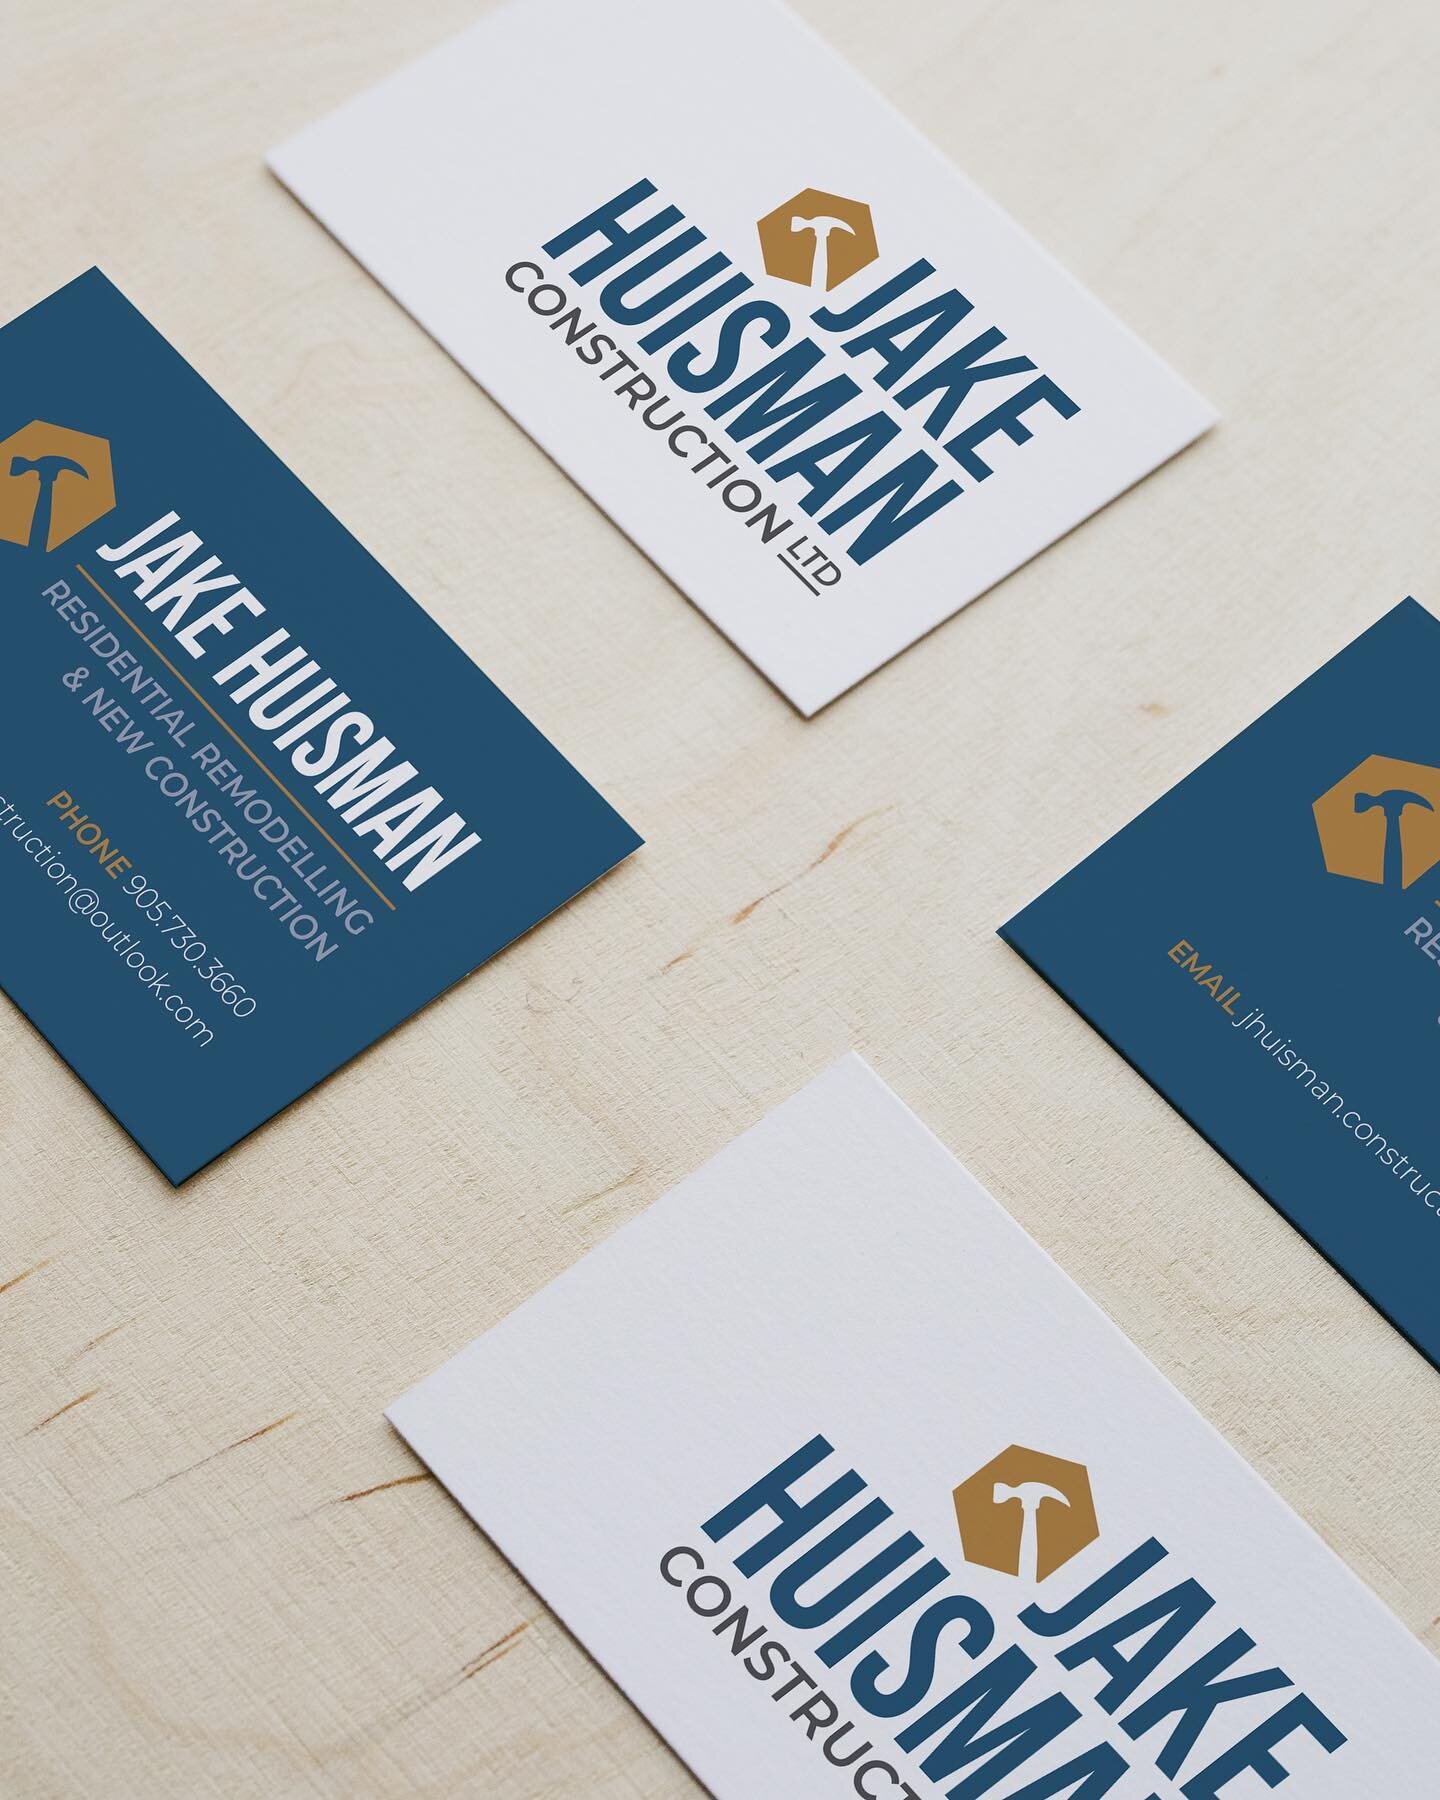 Logo and business cards for Jake Huisman Construction Ltd. 🔨

Need something designed for your biz? Let&rsquo;s chat! 💬

.
.
.
.
.
.
.
.
.
#chelseapetersillustration #graphicdesign #branding #rebrand #constructionmanagement #construction #designins